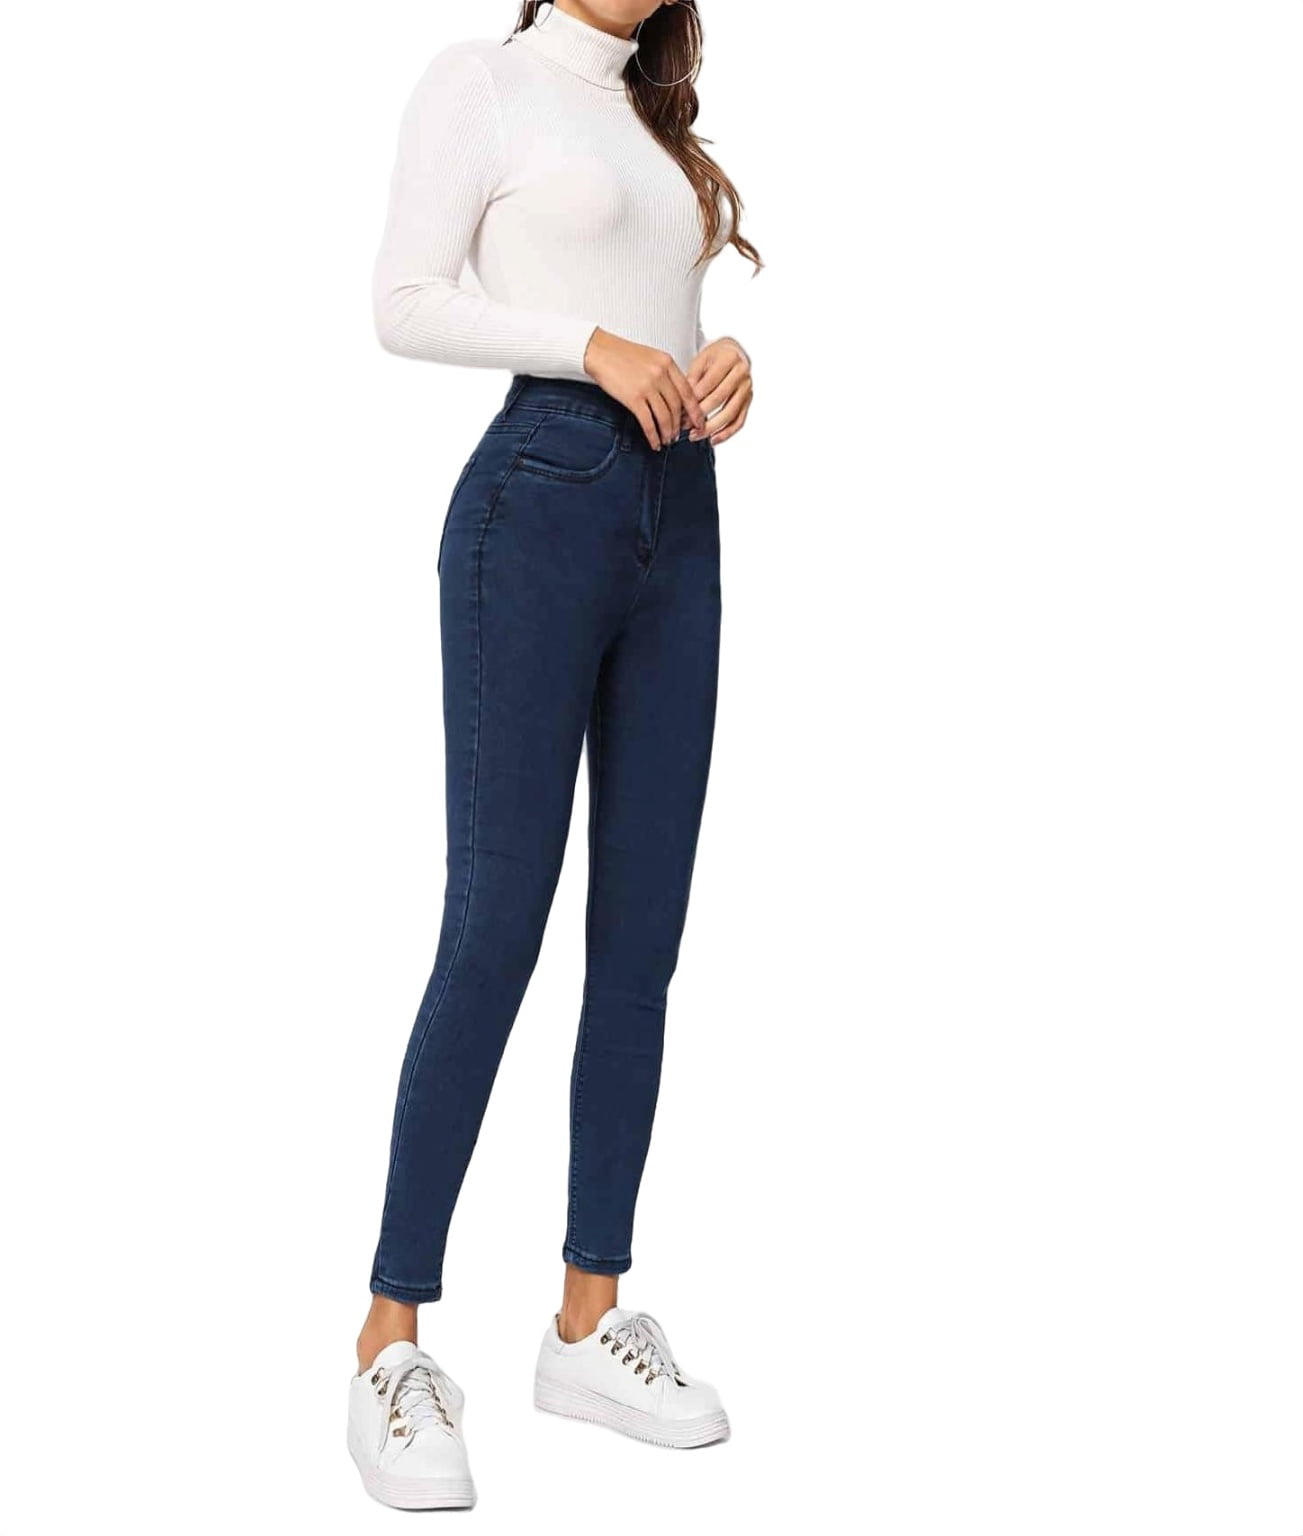 Women's Jeans Solid Skinny Jeans Jeans for Women (Color : Navy Blue, Size :  W30 L32) at Amazon Women's Jeans store